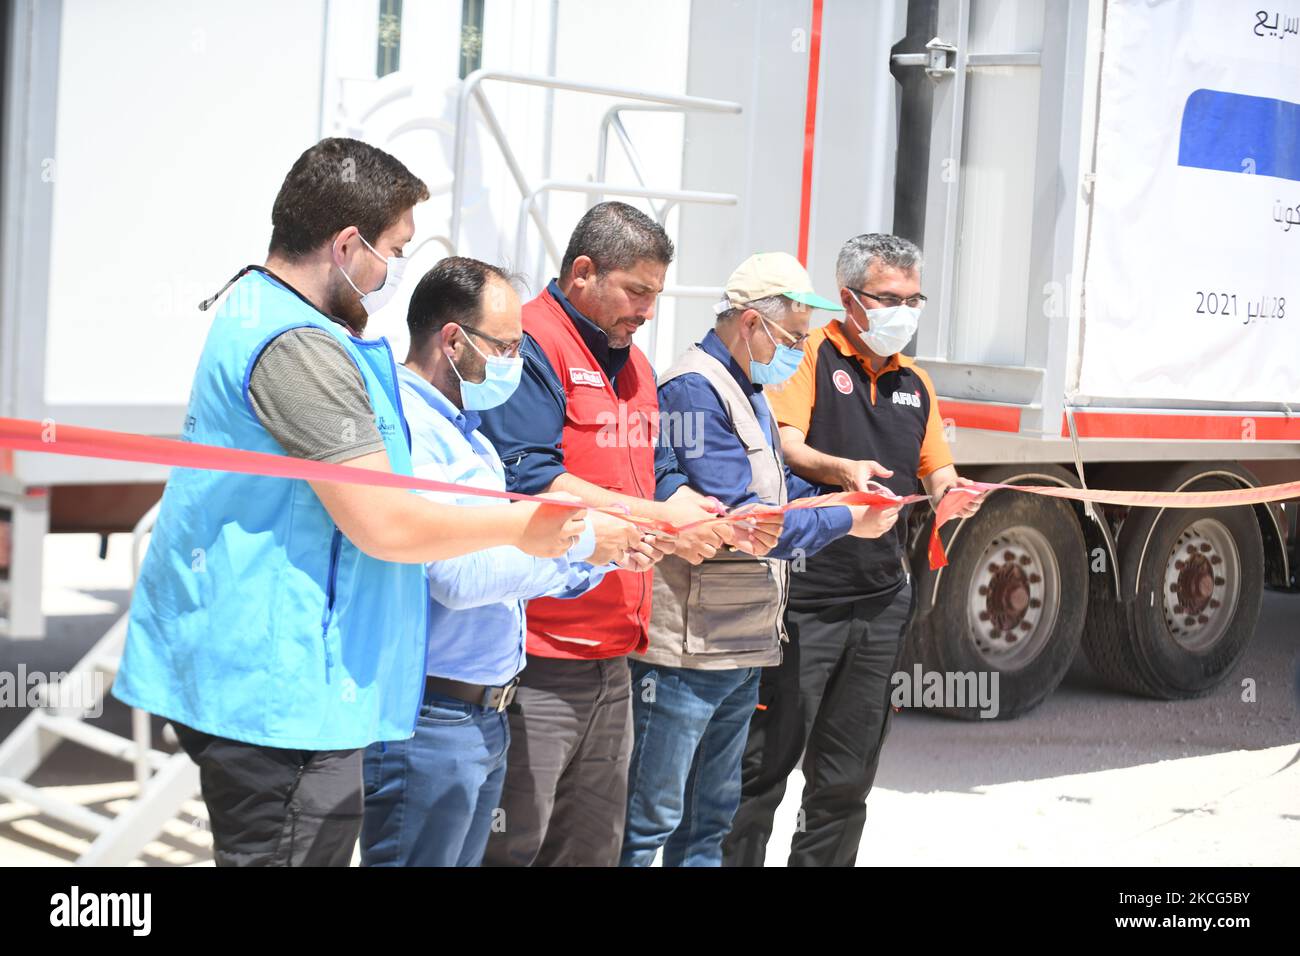 The Syrian Expatriates Medical Association ''Sima'' opened the first two mobile health centers in Idlib, Syria, on June 15, 2021 in the presence of Dr. ''Ahmed Samer Al-Esh'' CEO of Sima, Mr. ''Kadir Kemaloglu'' coordinator of the Turkish Red Crescent in Idlib, and Mr. ''Arjan Akar'', director of AFAD in the Turkish state of Hatay Mr. ''Ismail Yeket'' the official of the Turkish Religious Endowment, and Dr. ''Salem Abdan'' the director of Idlib Health. Stock Photo